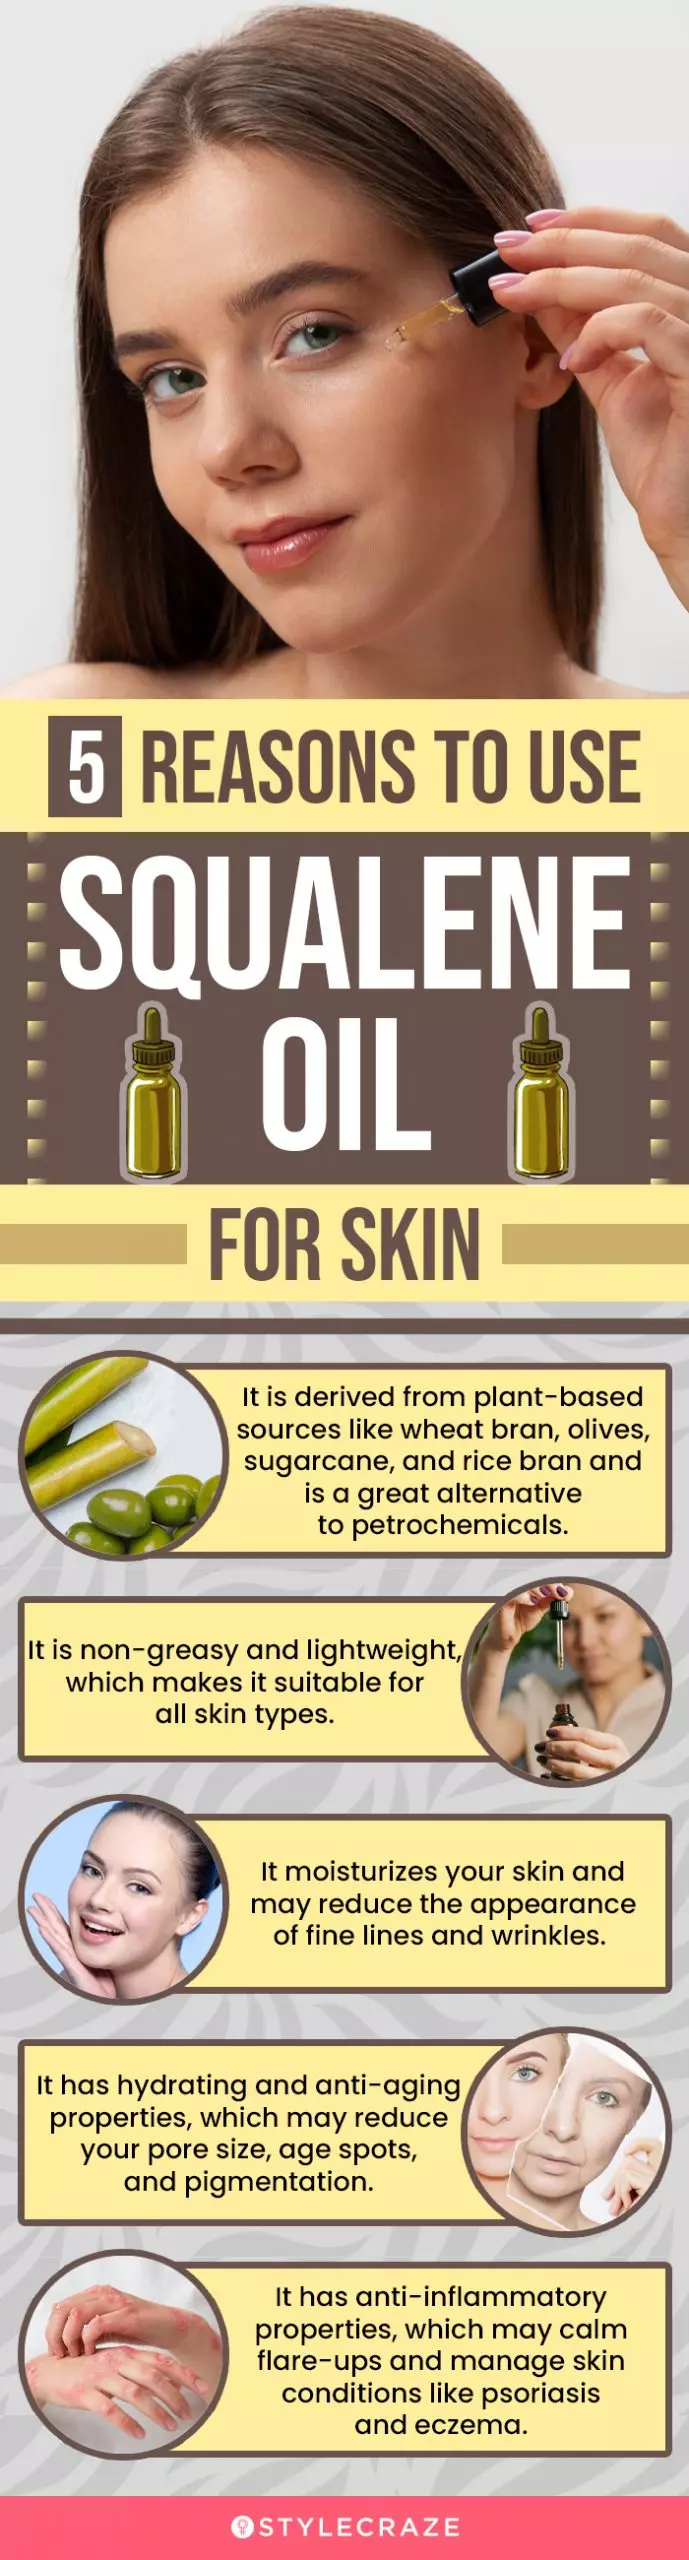 5 reasons for using squalene oil for skin (infographic)